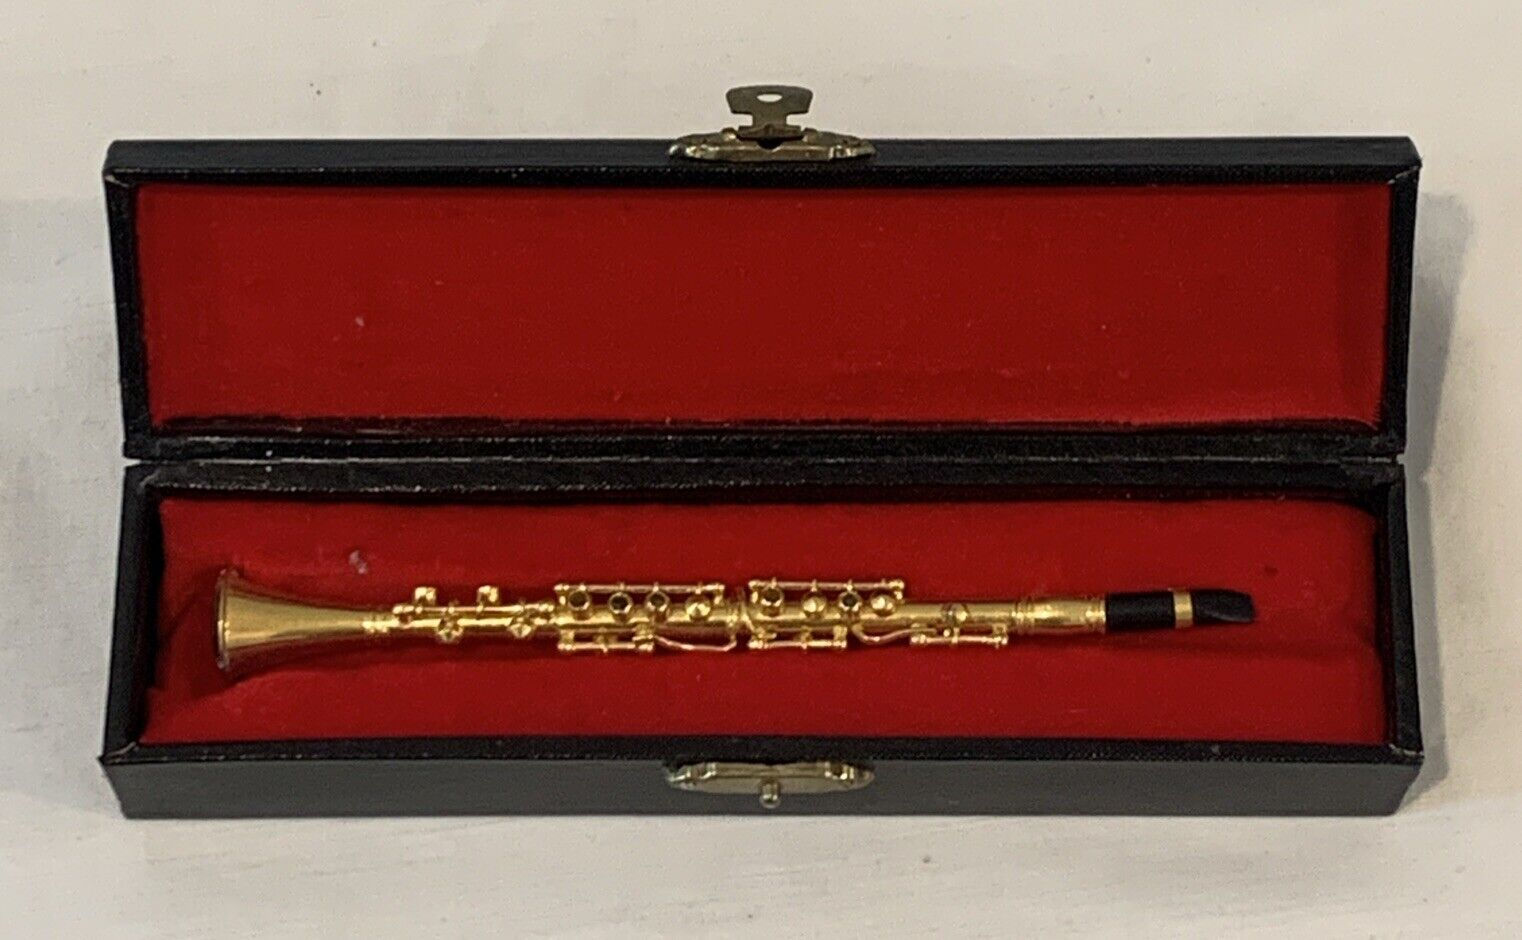 VTG Miniature 1/6 Scale Solid Brass Copy of Clarinet Musical Instrument In Case